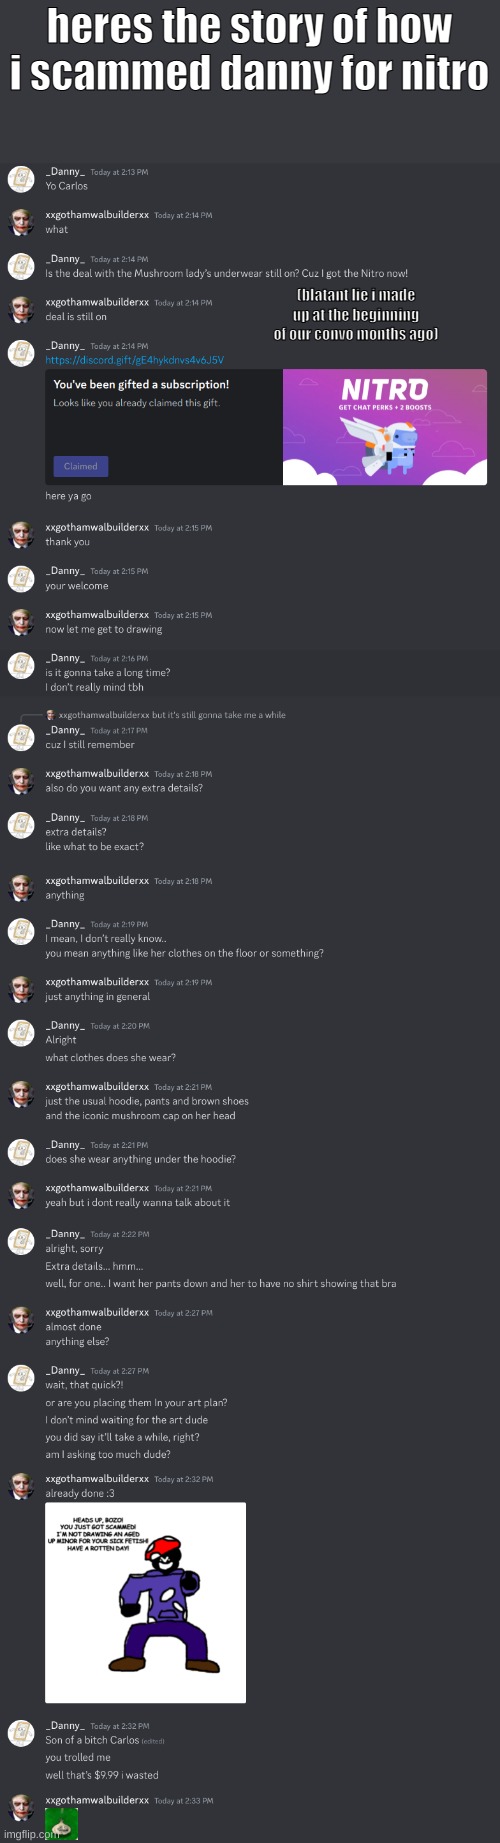 heres the story of how i scammed danny for nitro; (blatant lie i made up at the beginning of our convo months ago) | made w/ Imgflip meme maker